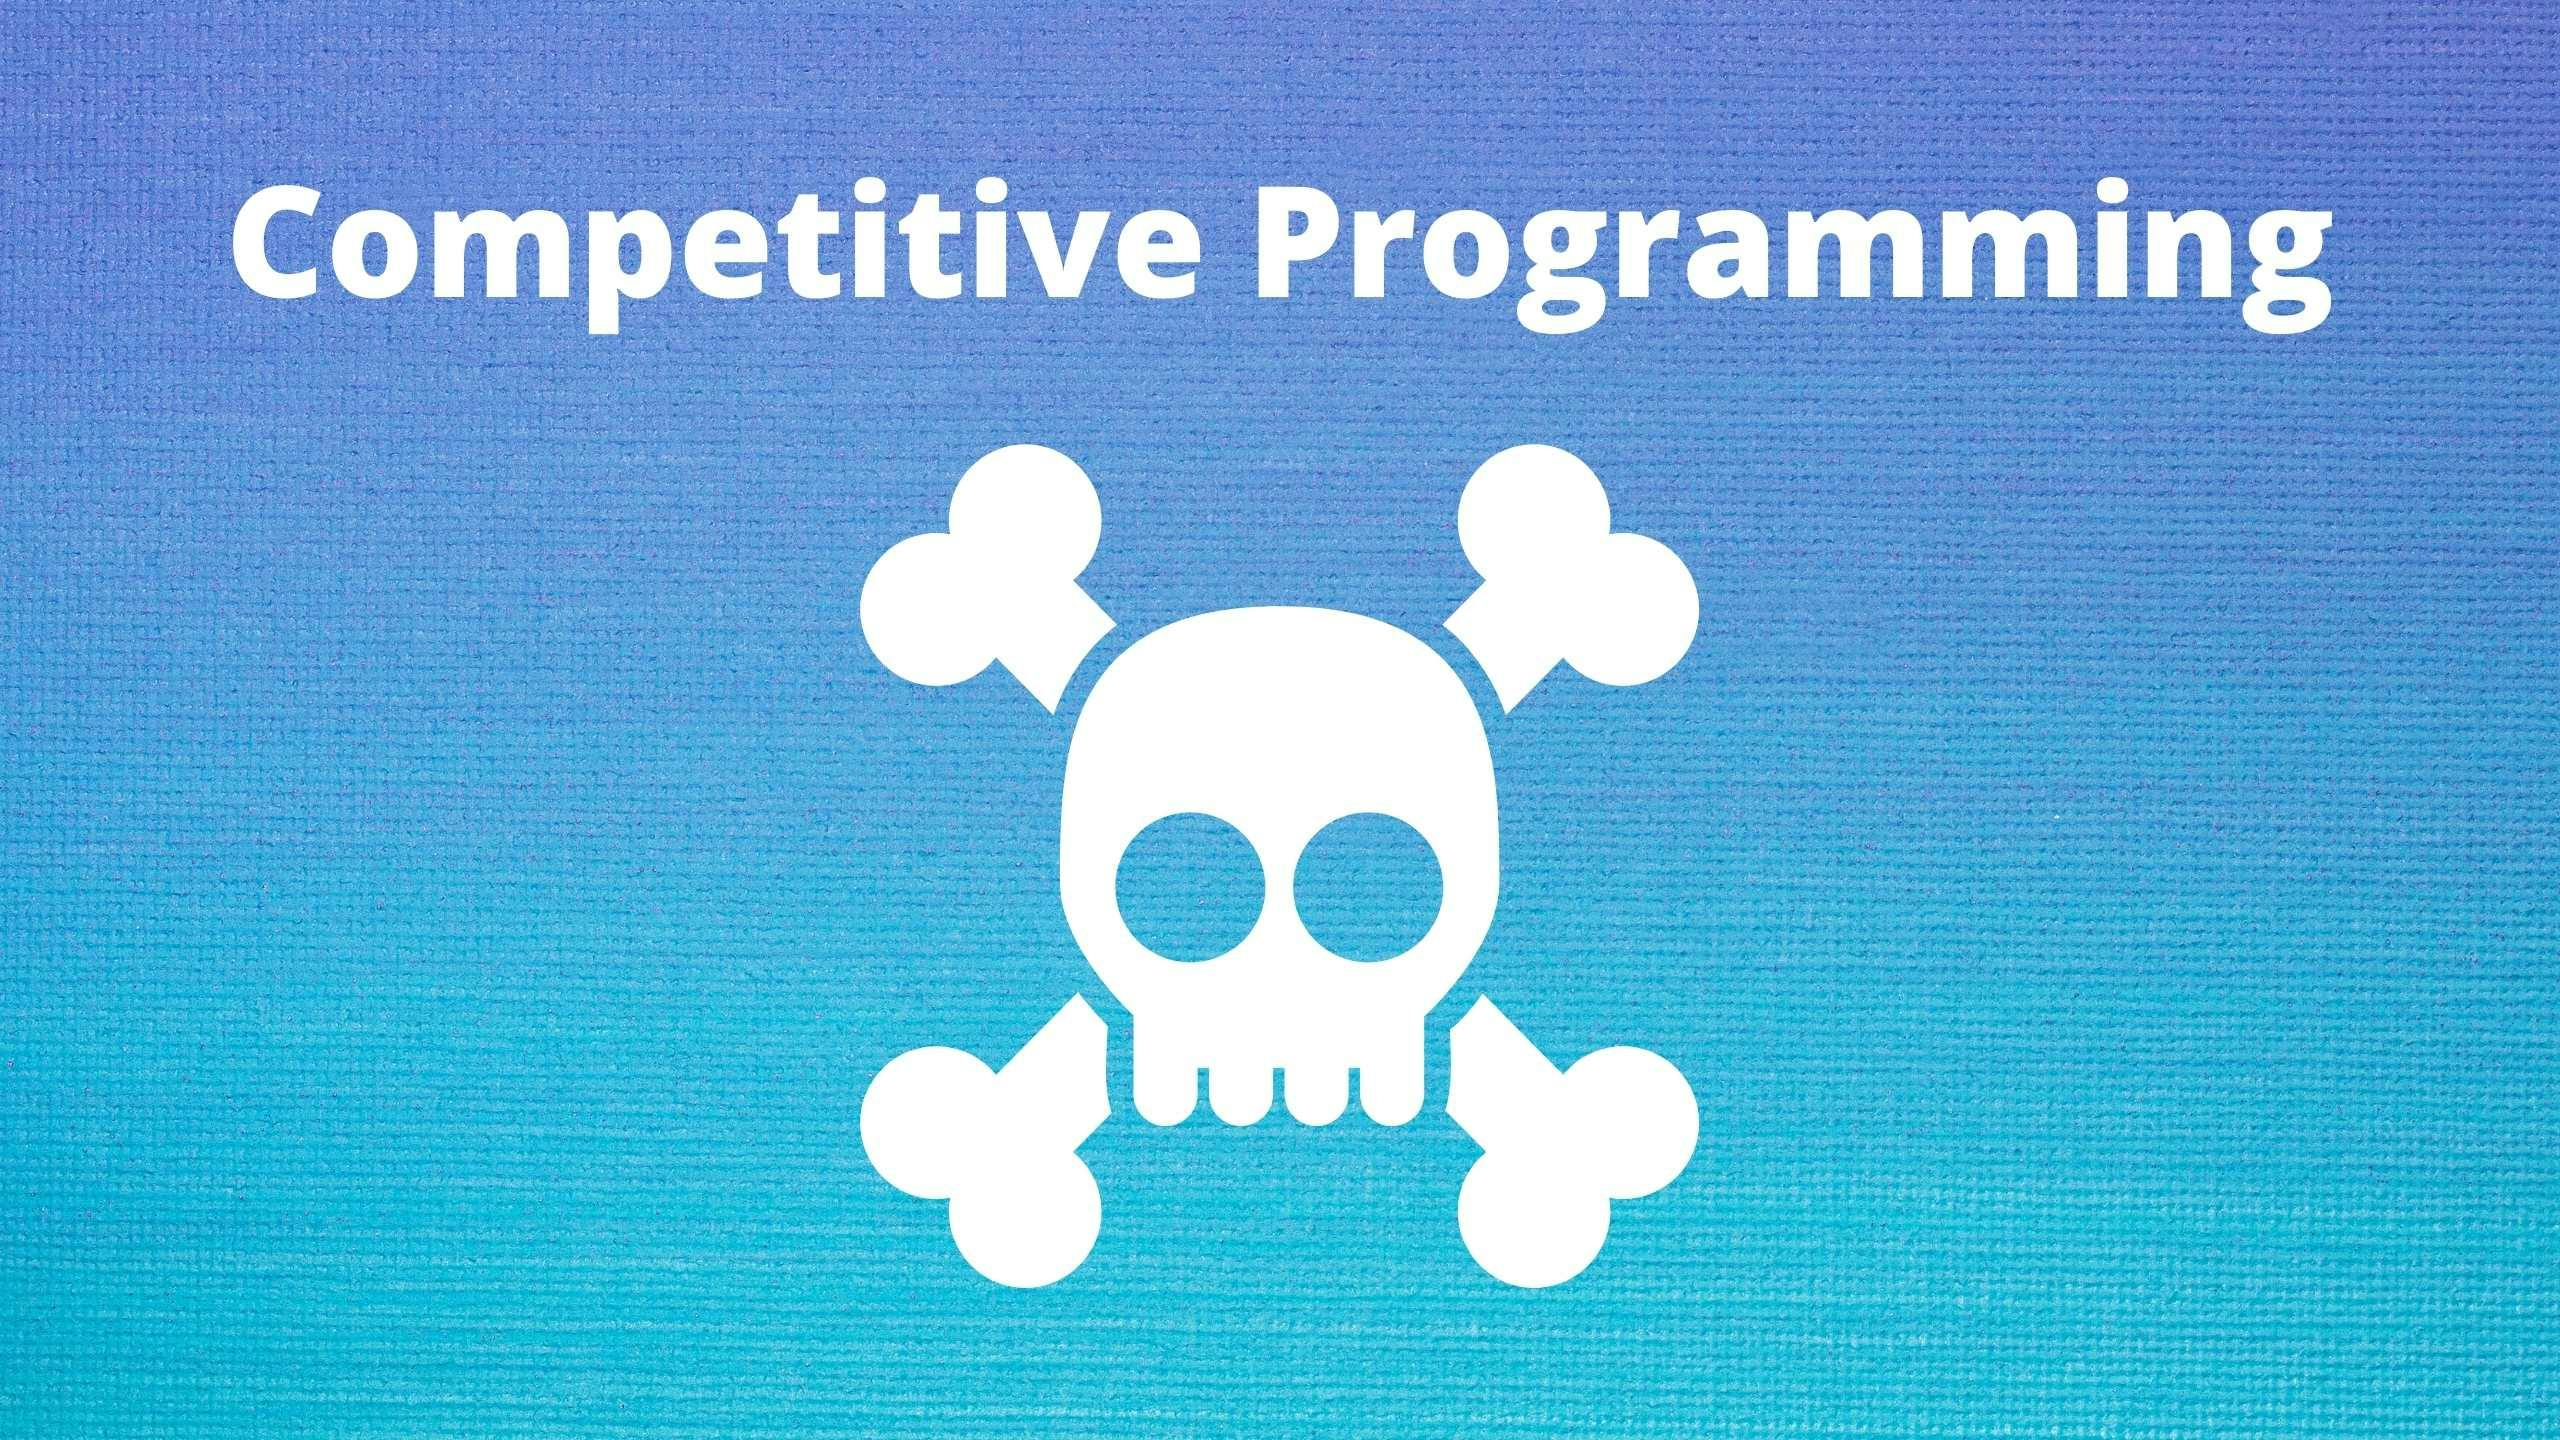 Misconceptions and Dark Side of Competitive Programming